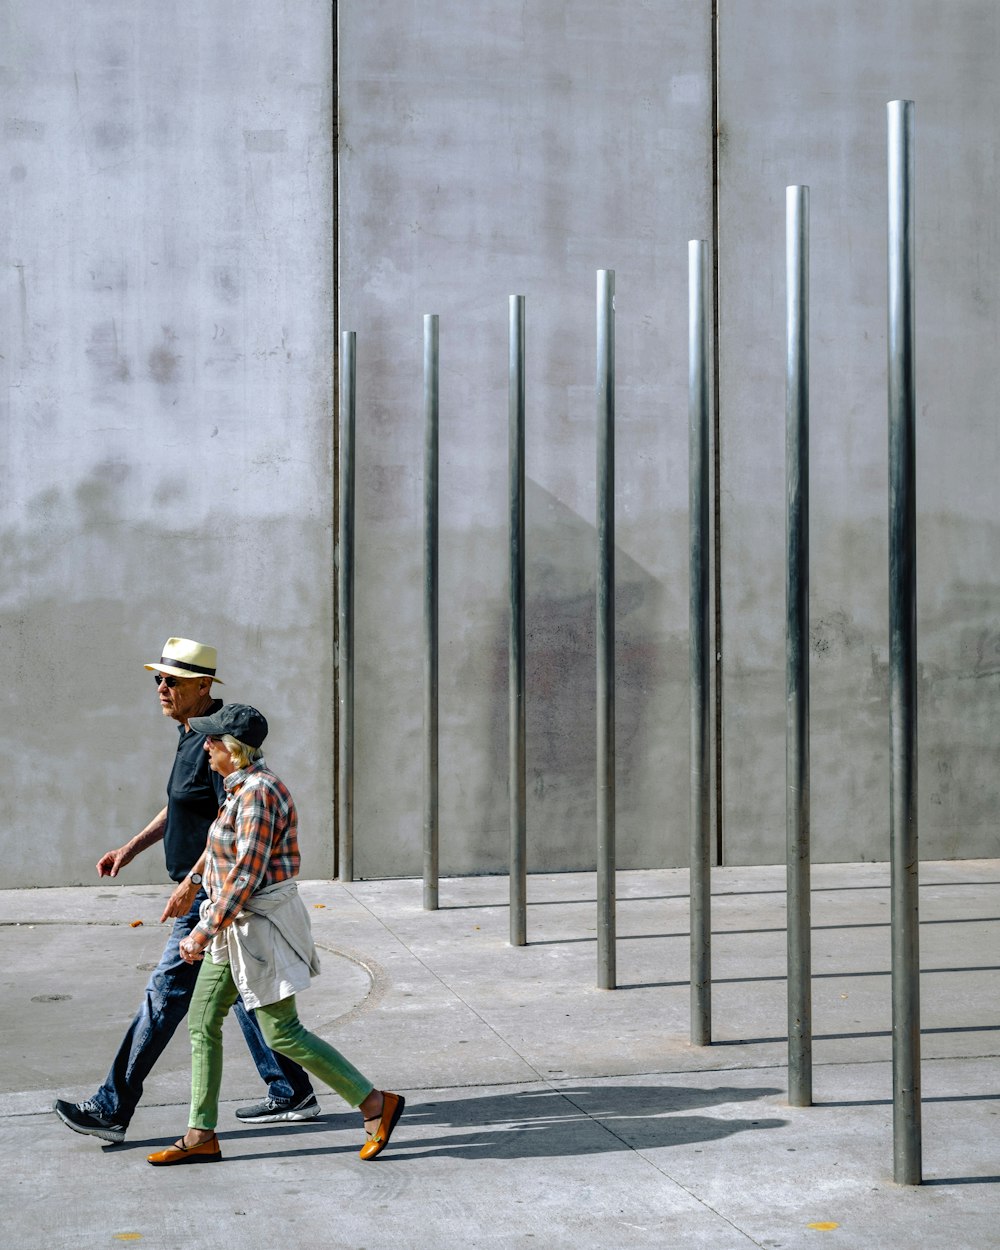 man and woman walking near stainless steel posts